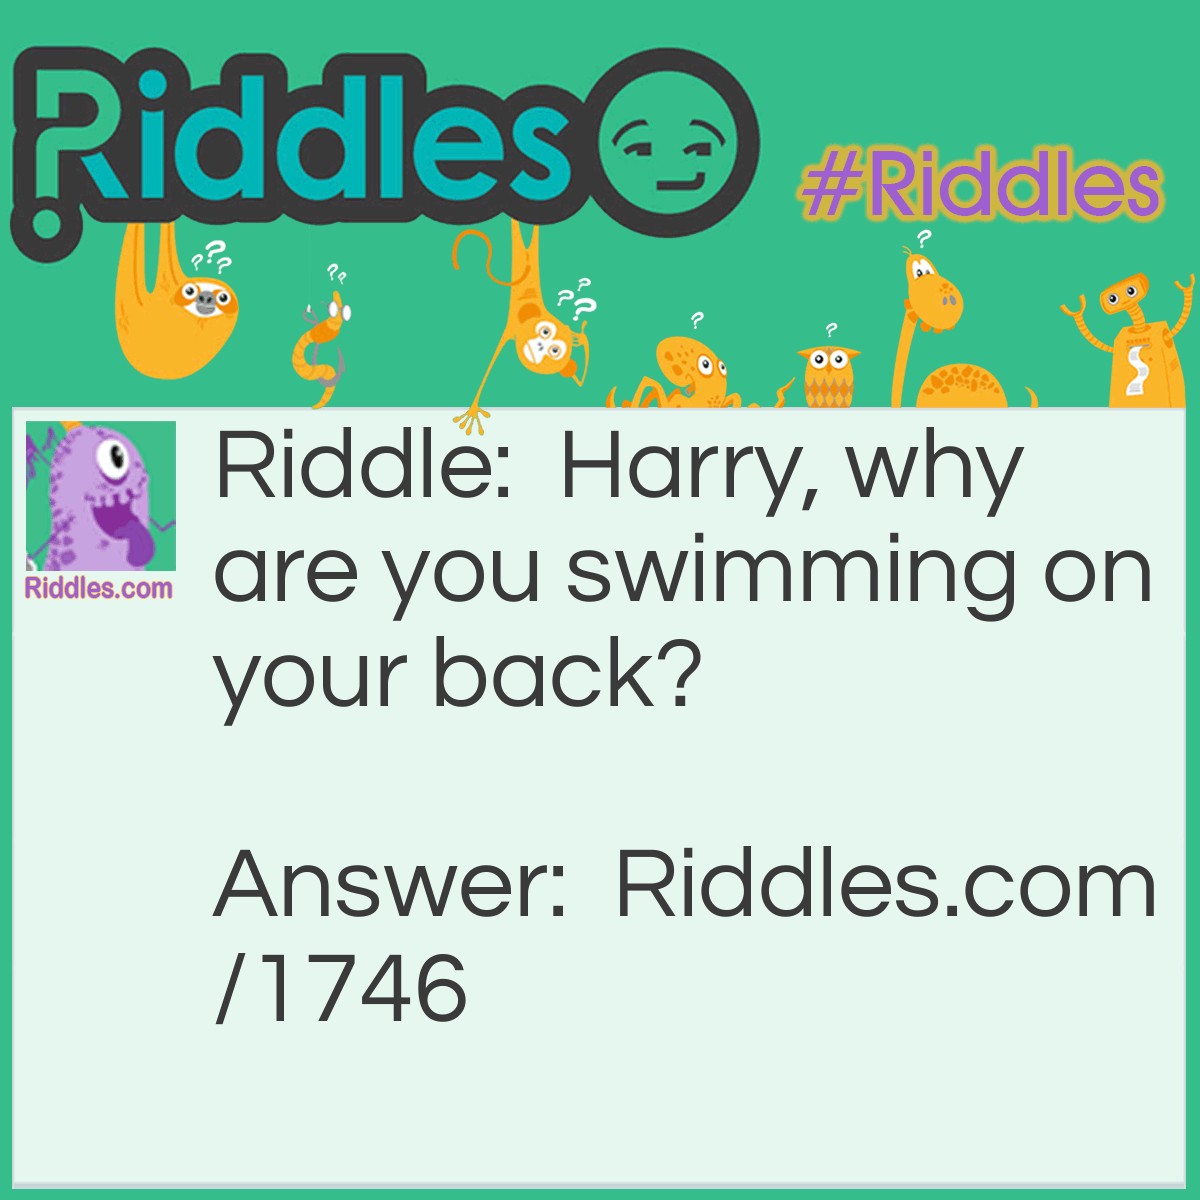 Riddle: Harry, why are you swimming on your back? Answer: They say you should never swim on a full stomach.